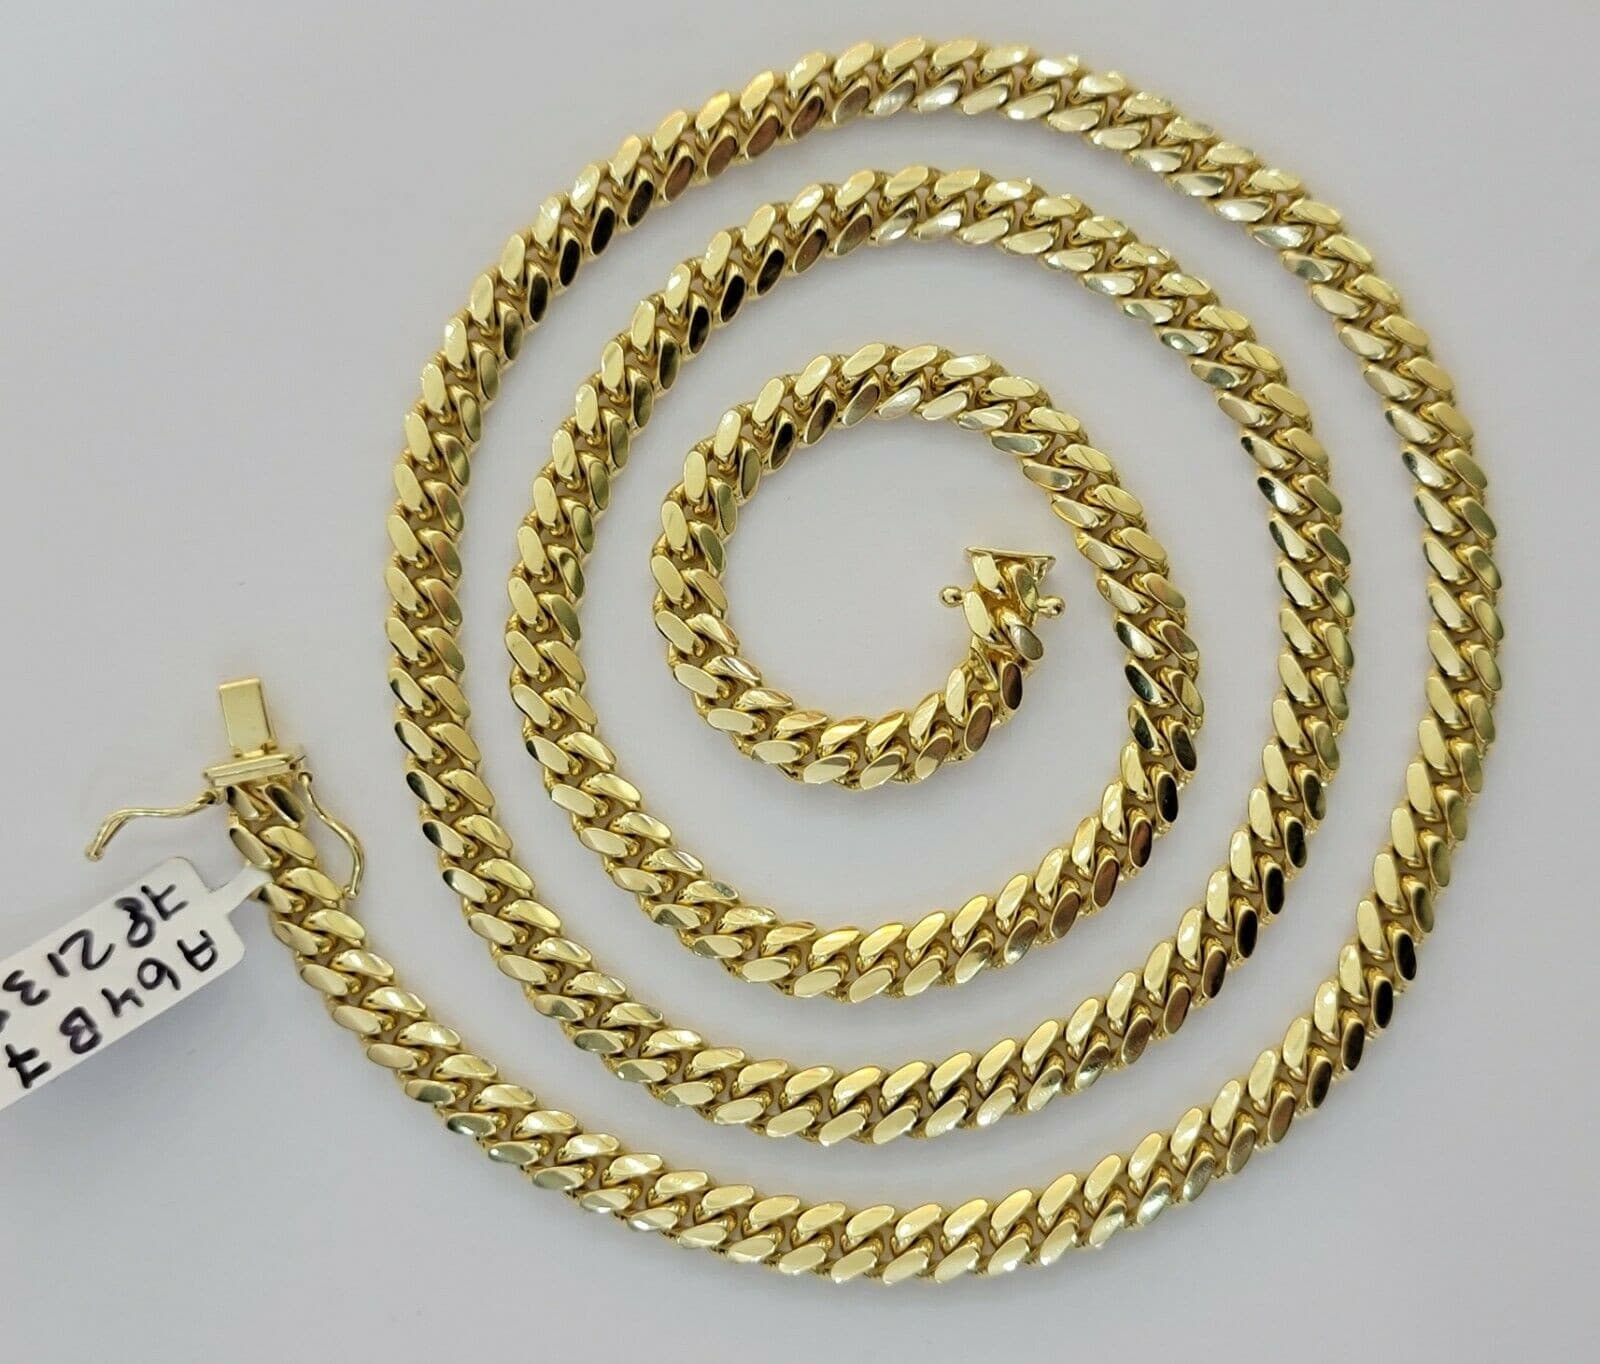 Solid 10k Gold Miami Cuban Solid Links Chain 24